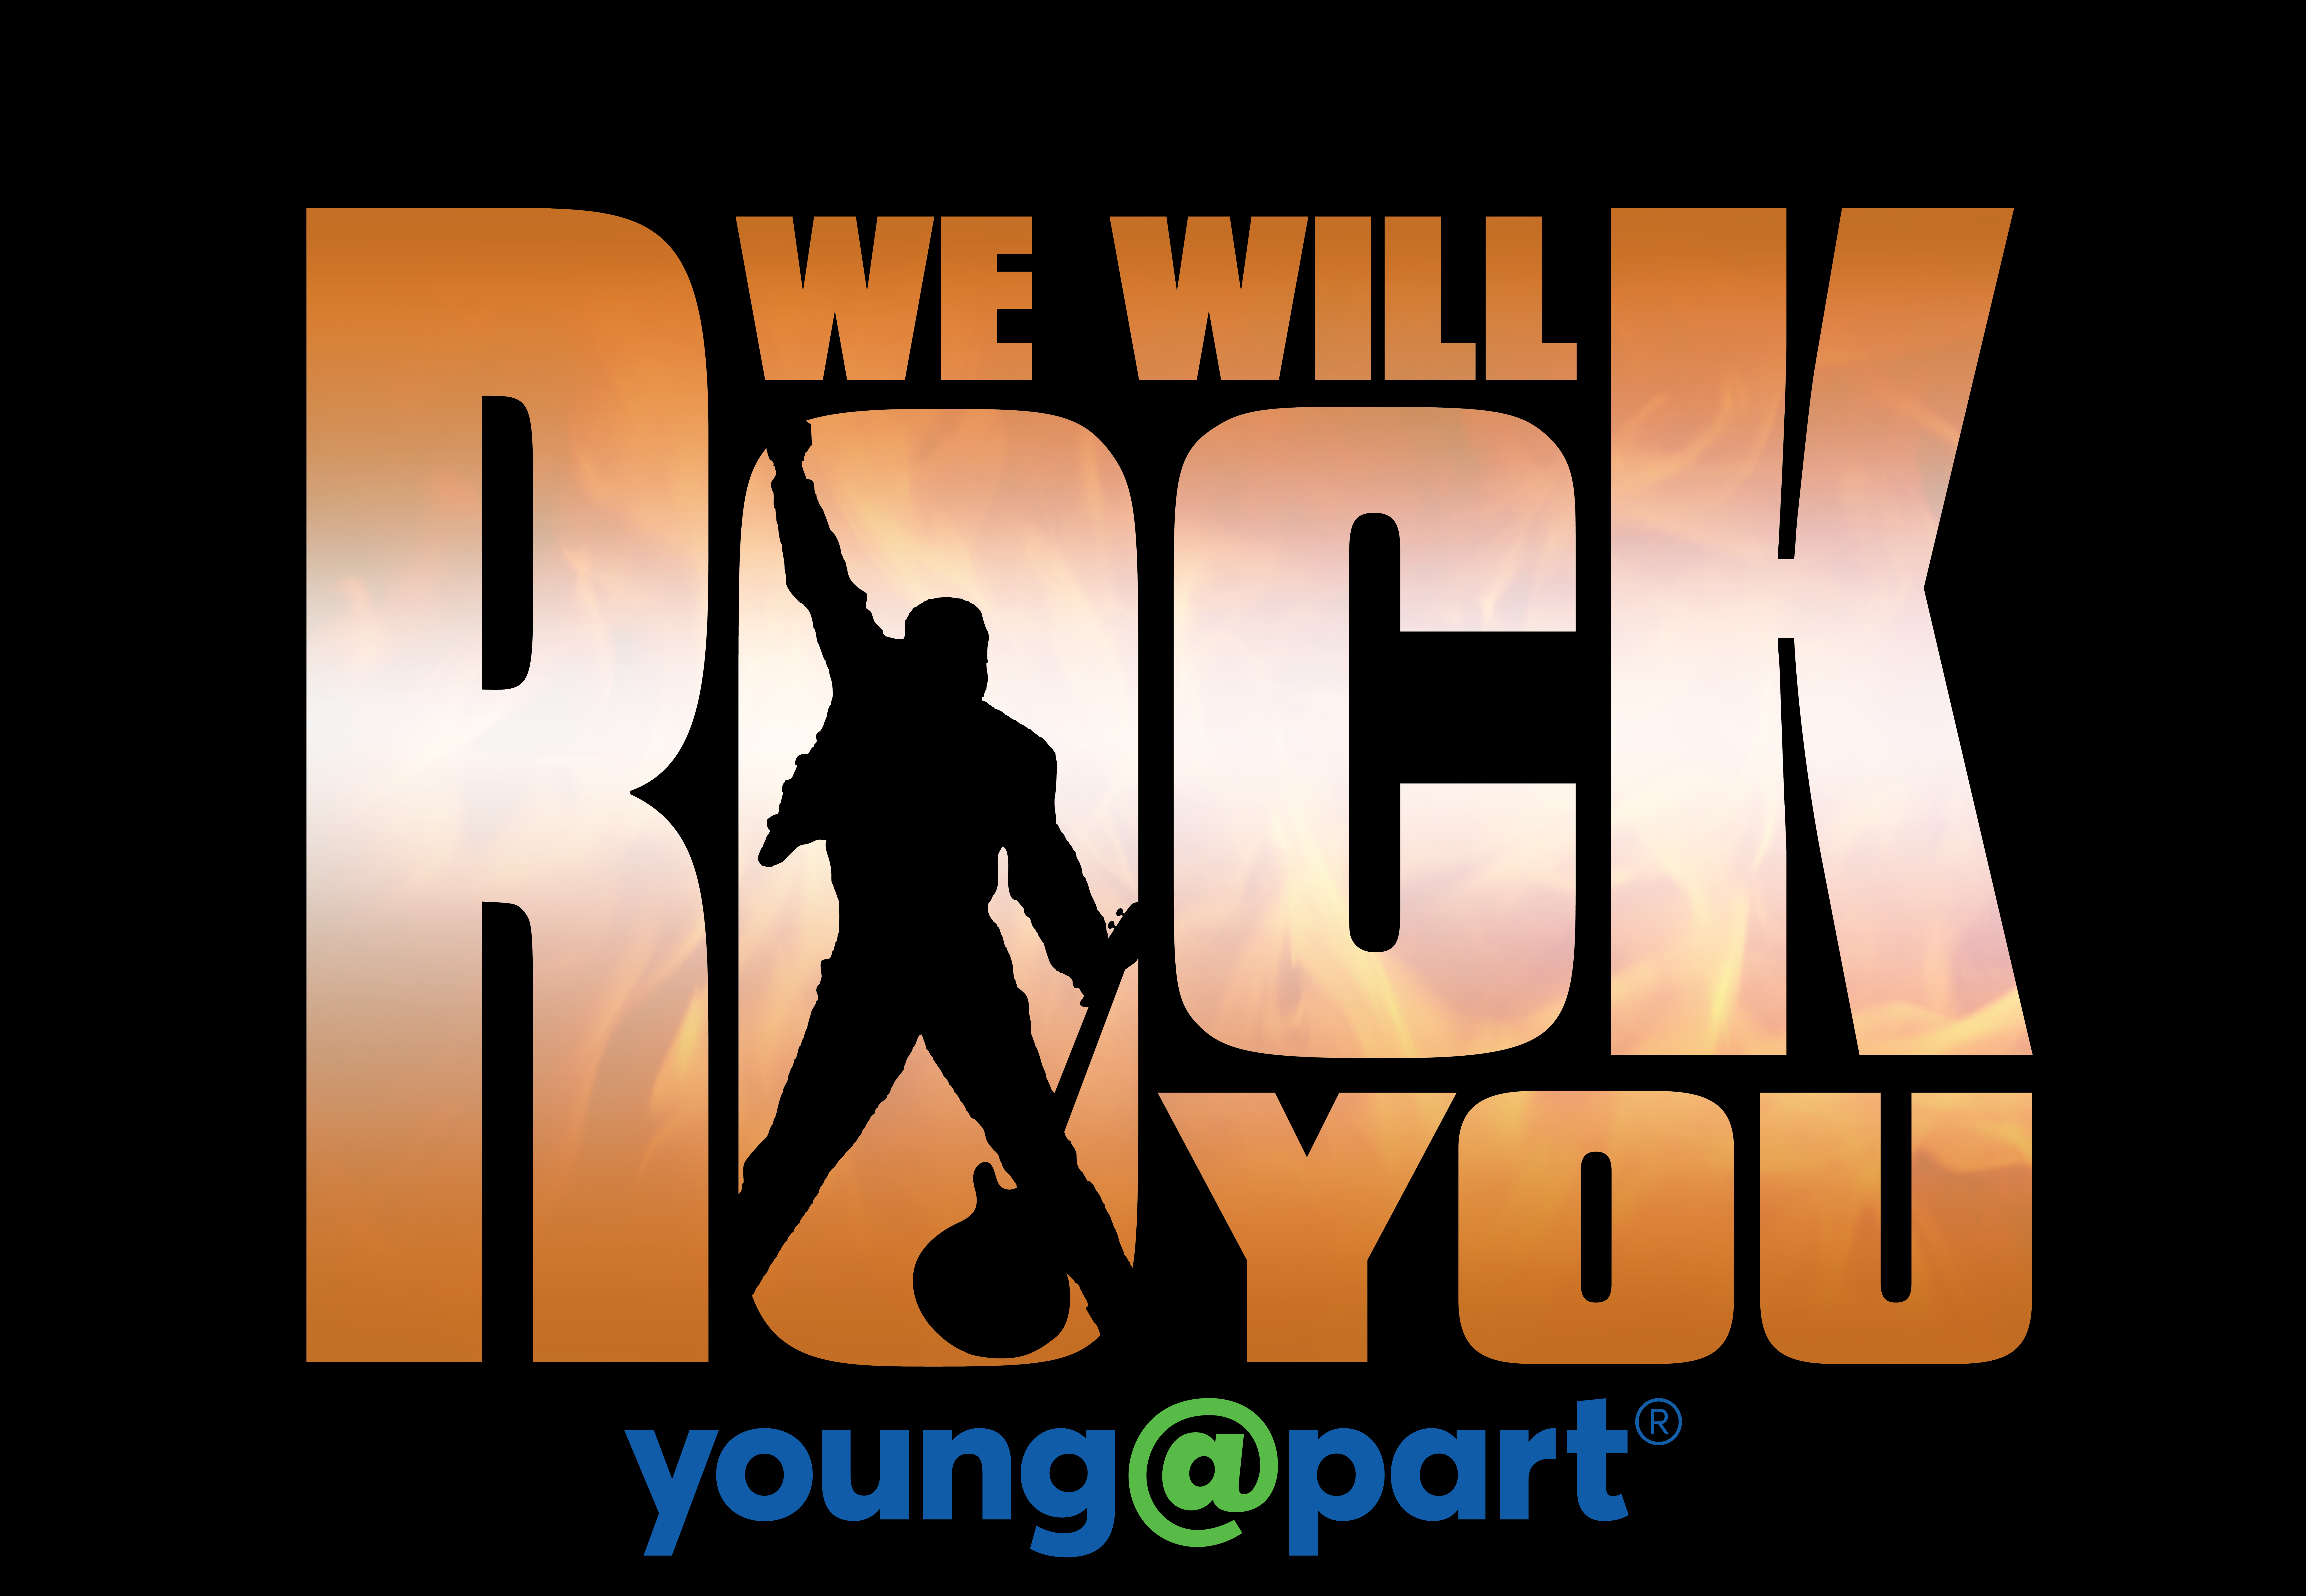 We Will Rock You Young @ Part Logo